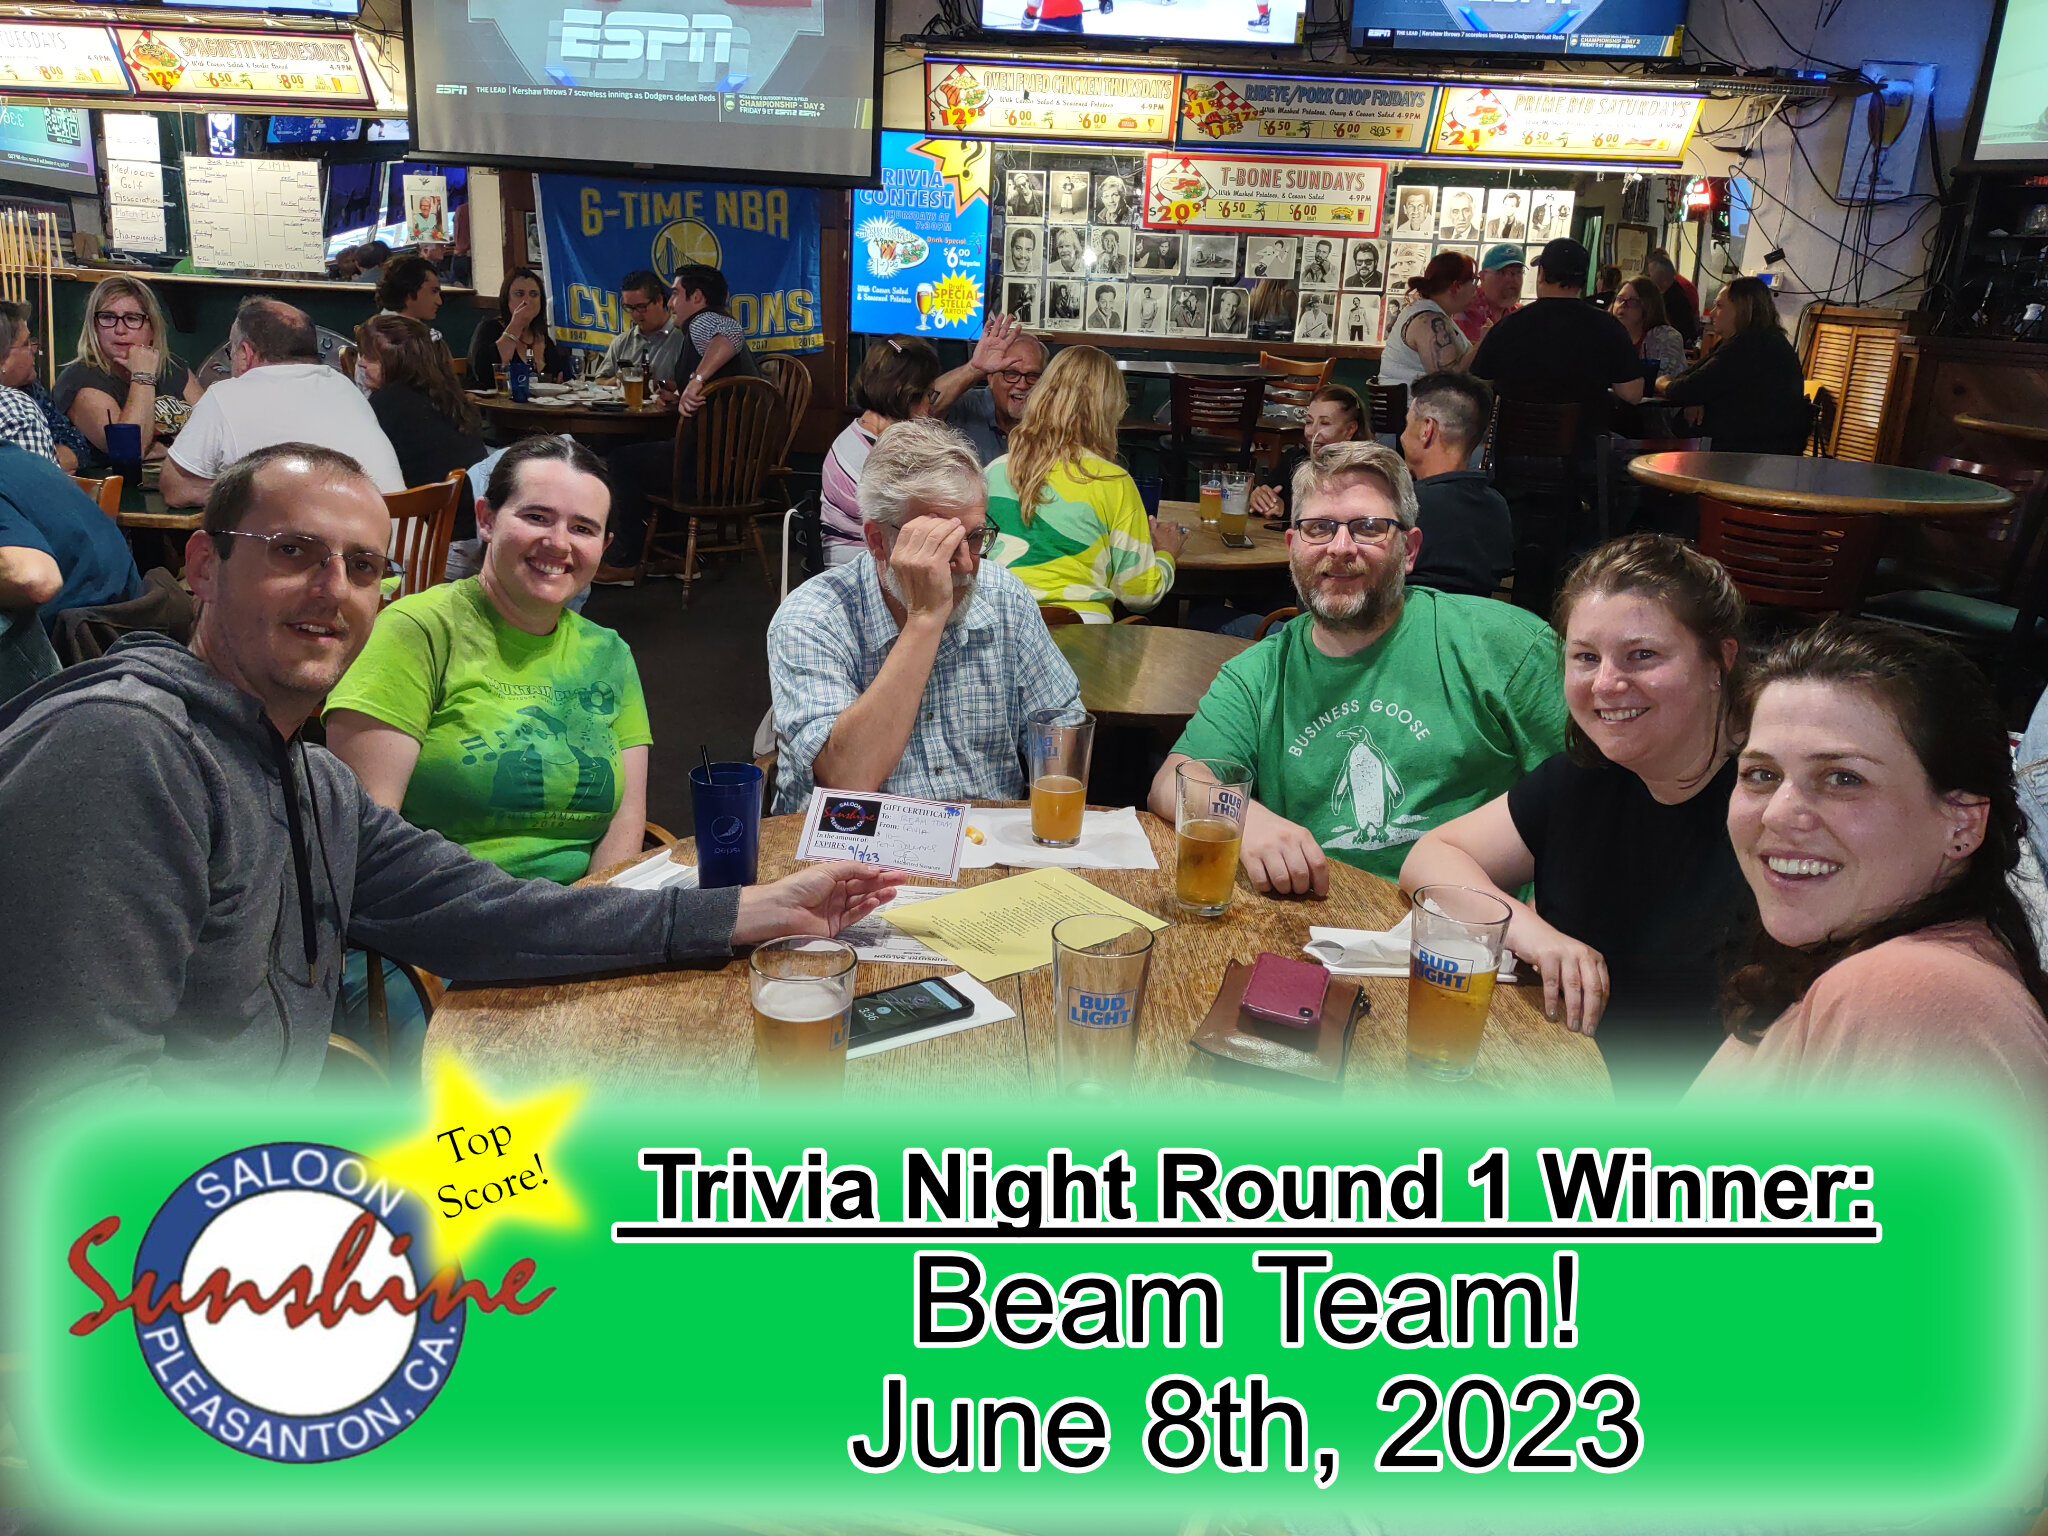 Congratulations to &quot;Beam Team&quot; for winning top score at last weeks Thursday Trivia night!

Join us every Thursday for multiple rounds of general trivia at #Sunshinesaloon. Multiple rounds, multiple chances to win and make it to the hall of 